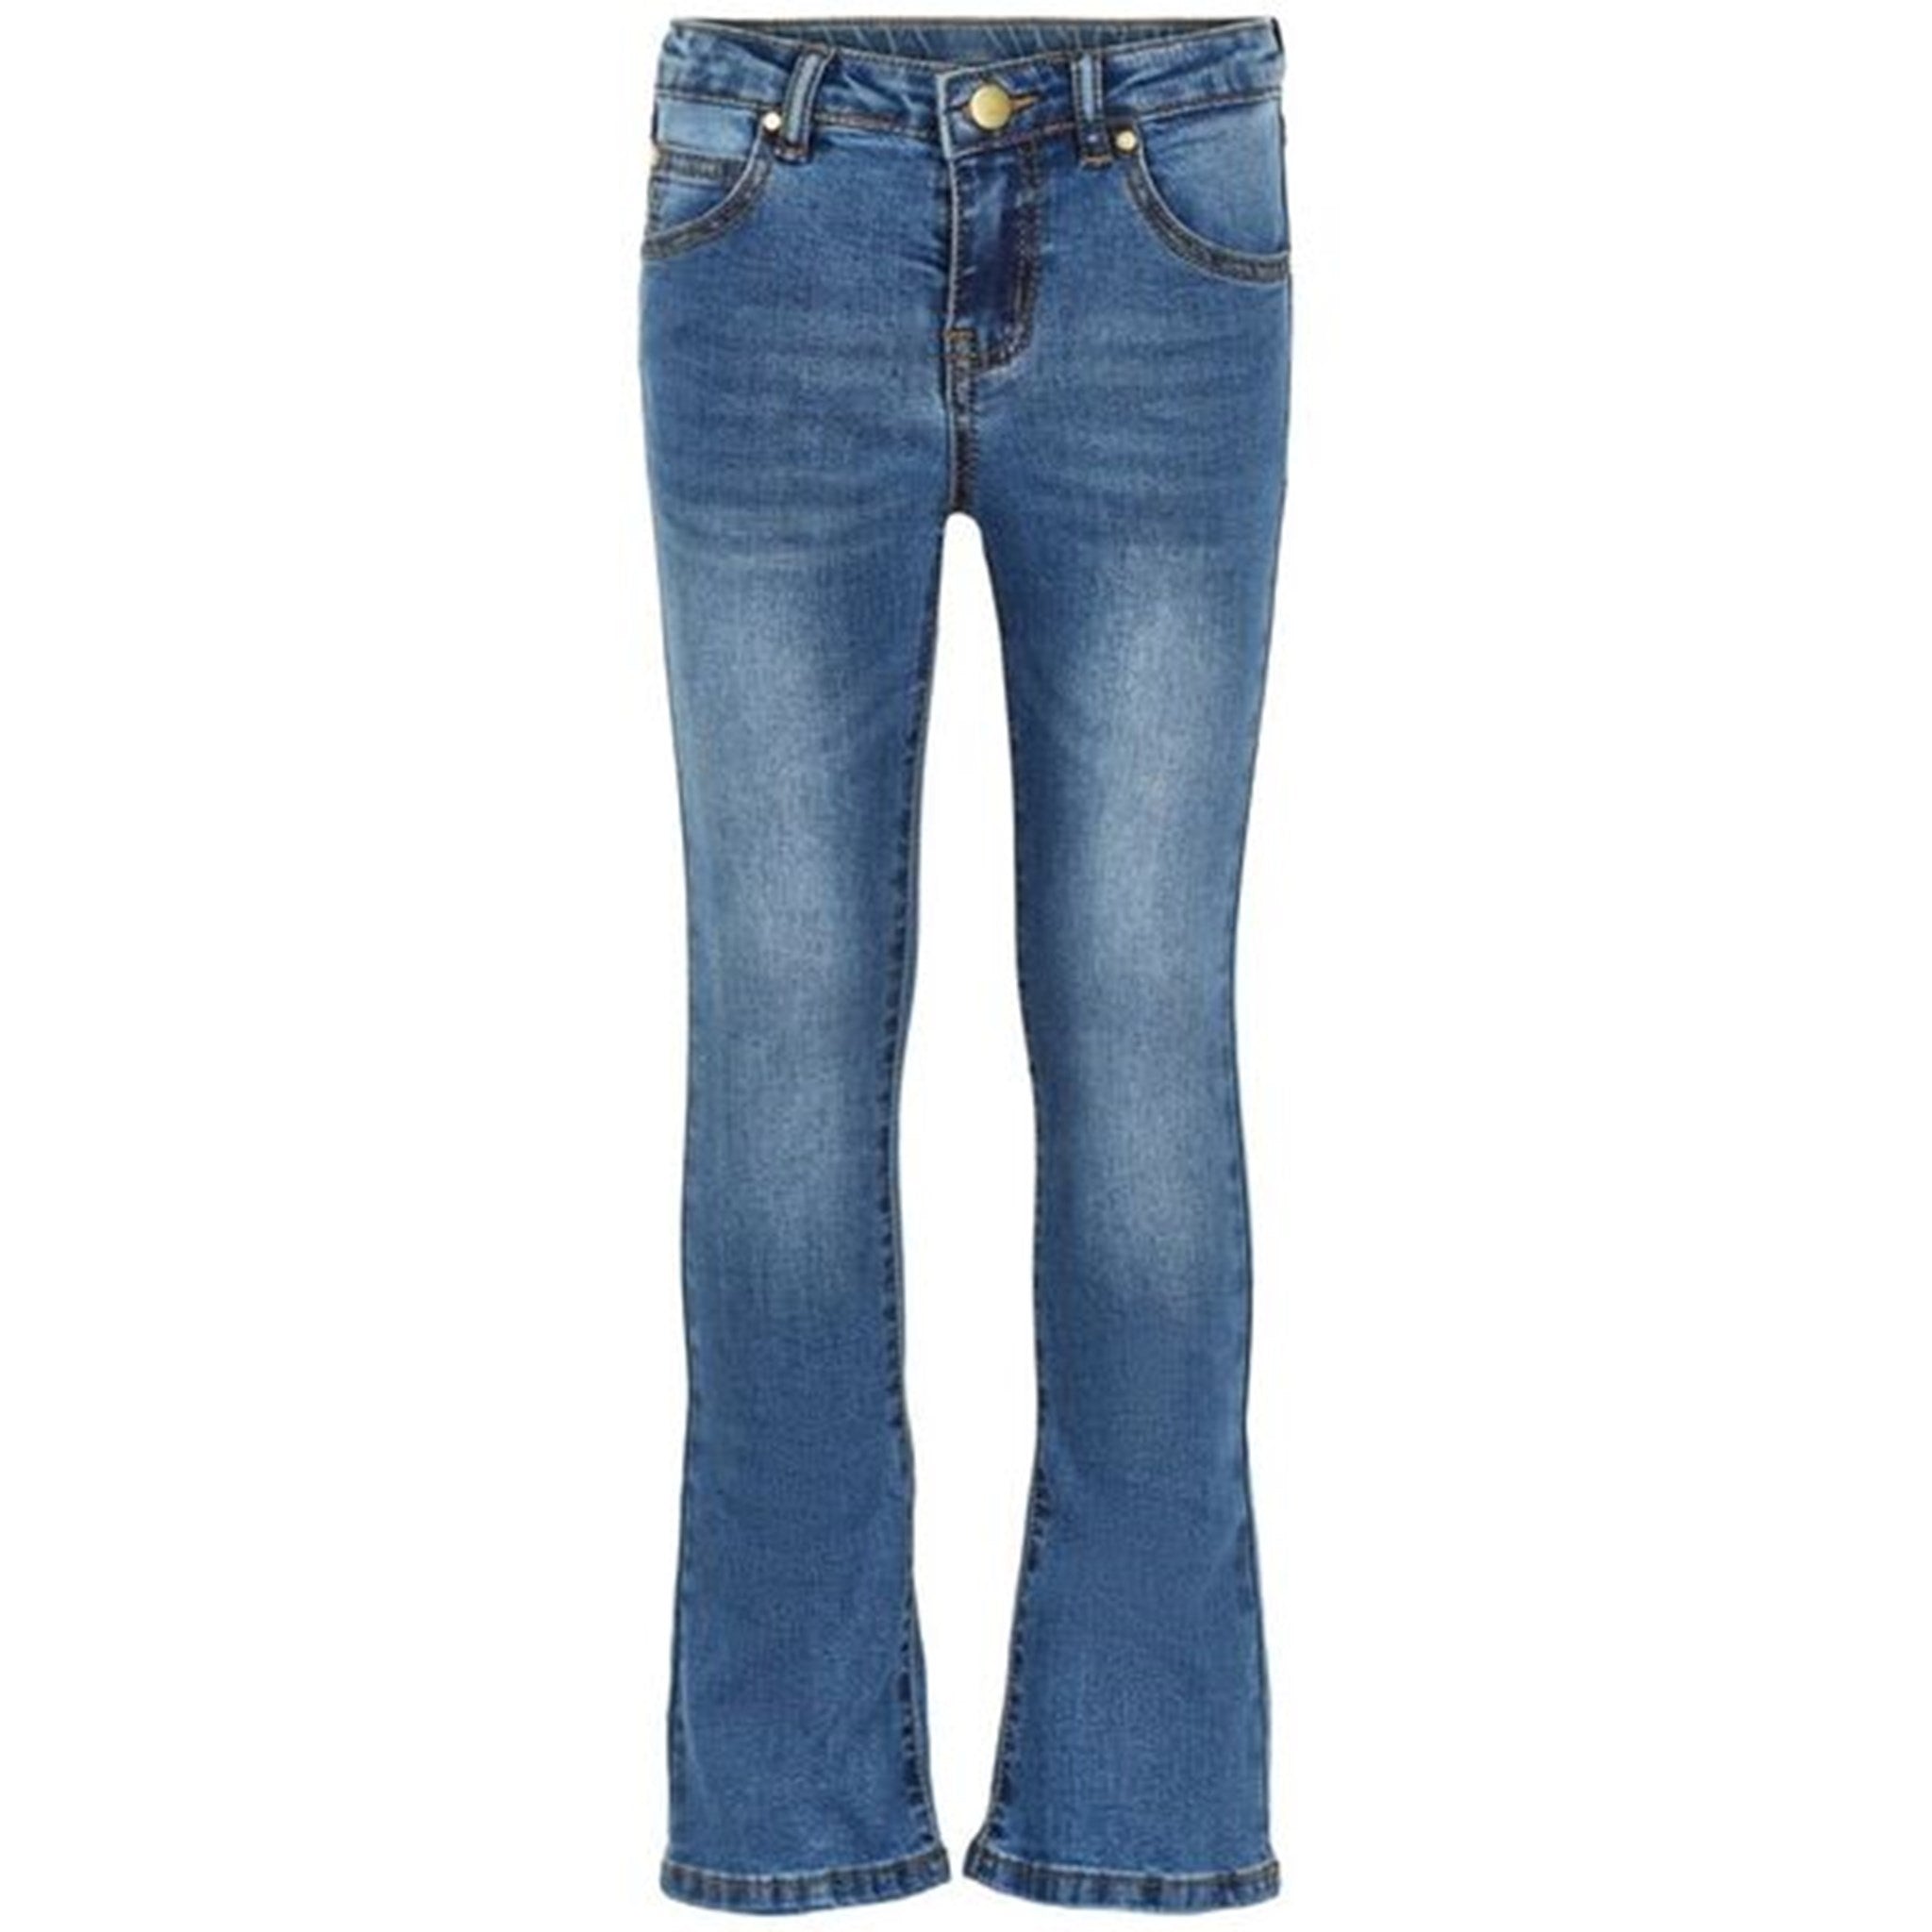 The New Flared Jeans Blue Denim